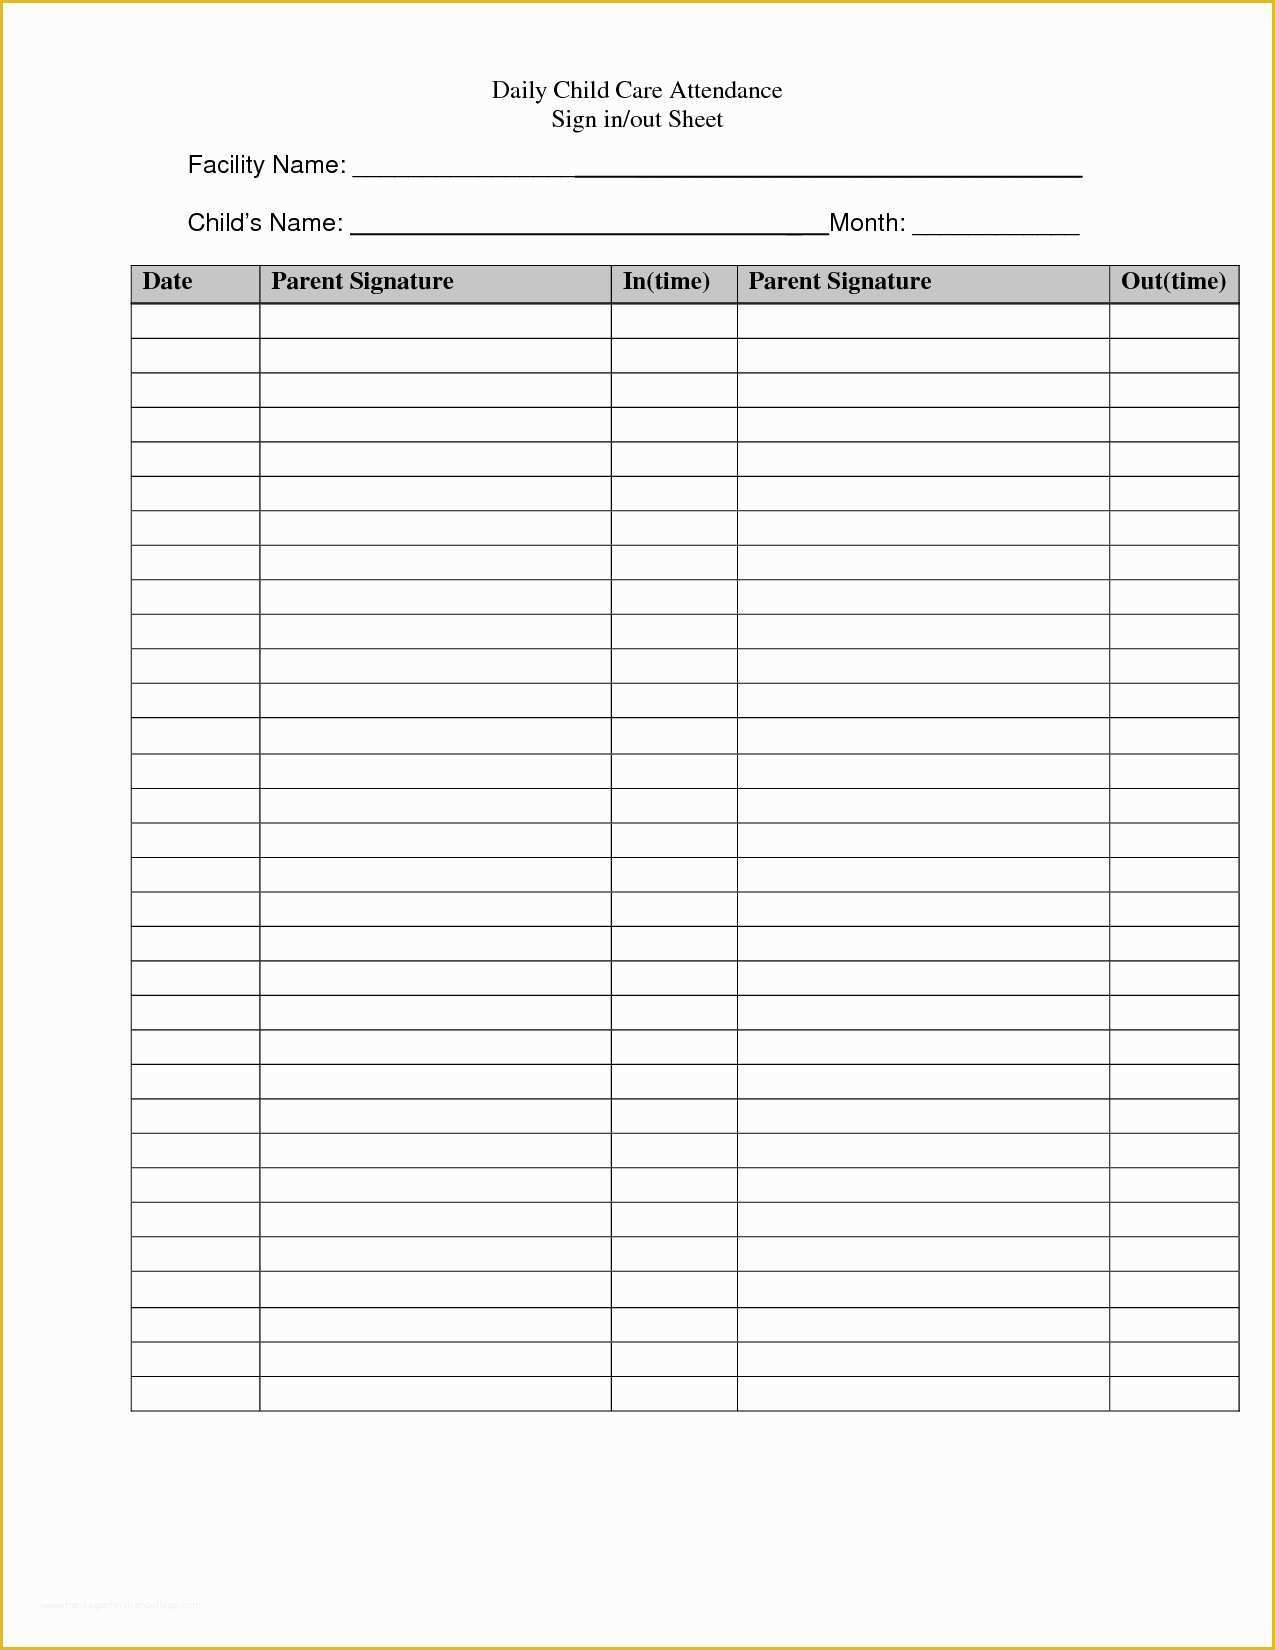 Free Ticket Templates 8 Per Page Of Raffle Ticket Tracking Spreadsheet with Printable Raffle